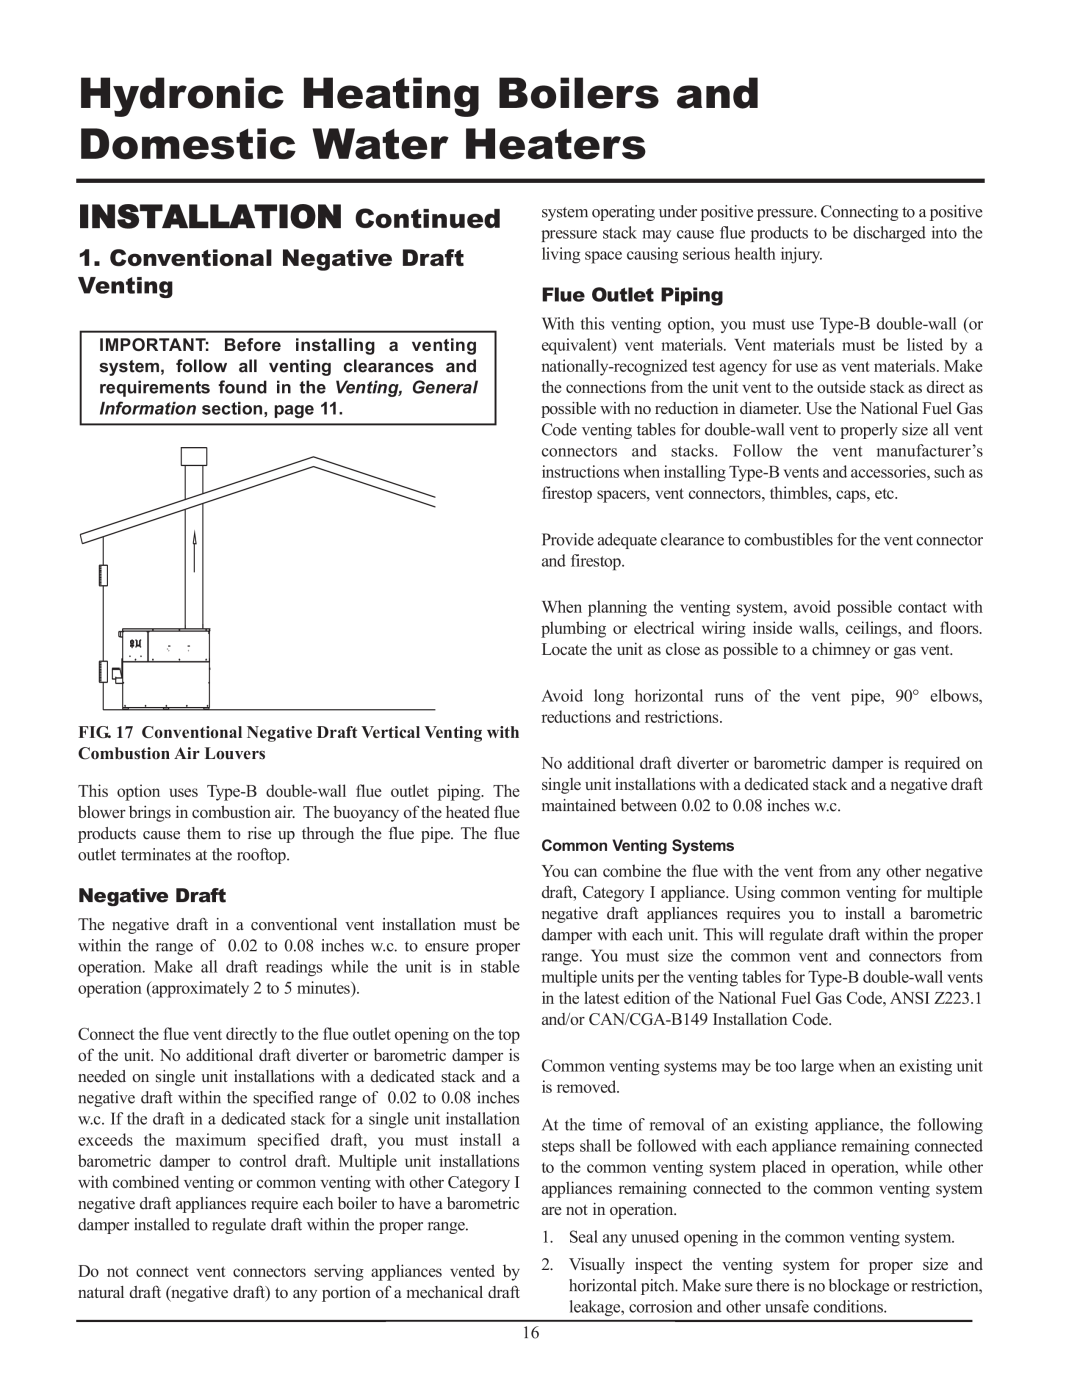 Lochinvar CF-CH(E)-i&s-08, 999 - 750, 399 Conventional Negative Draft Venting, Flue Outlet Piping, INSTALLATION Continued 